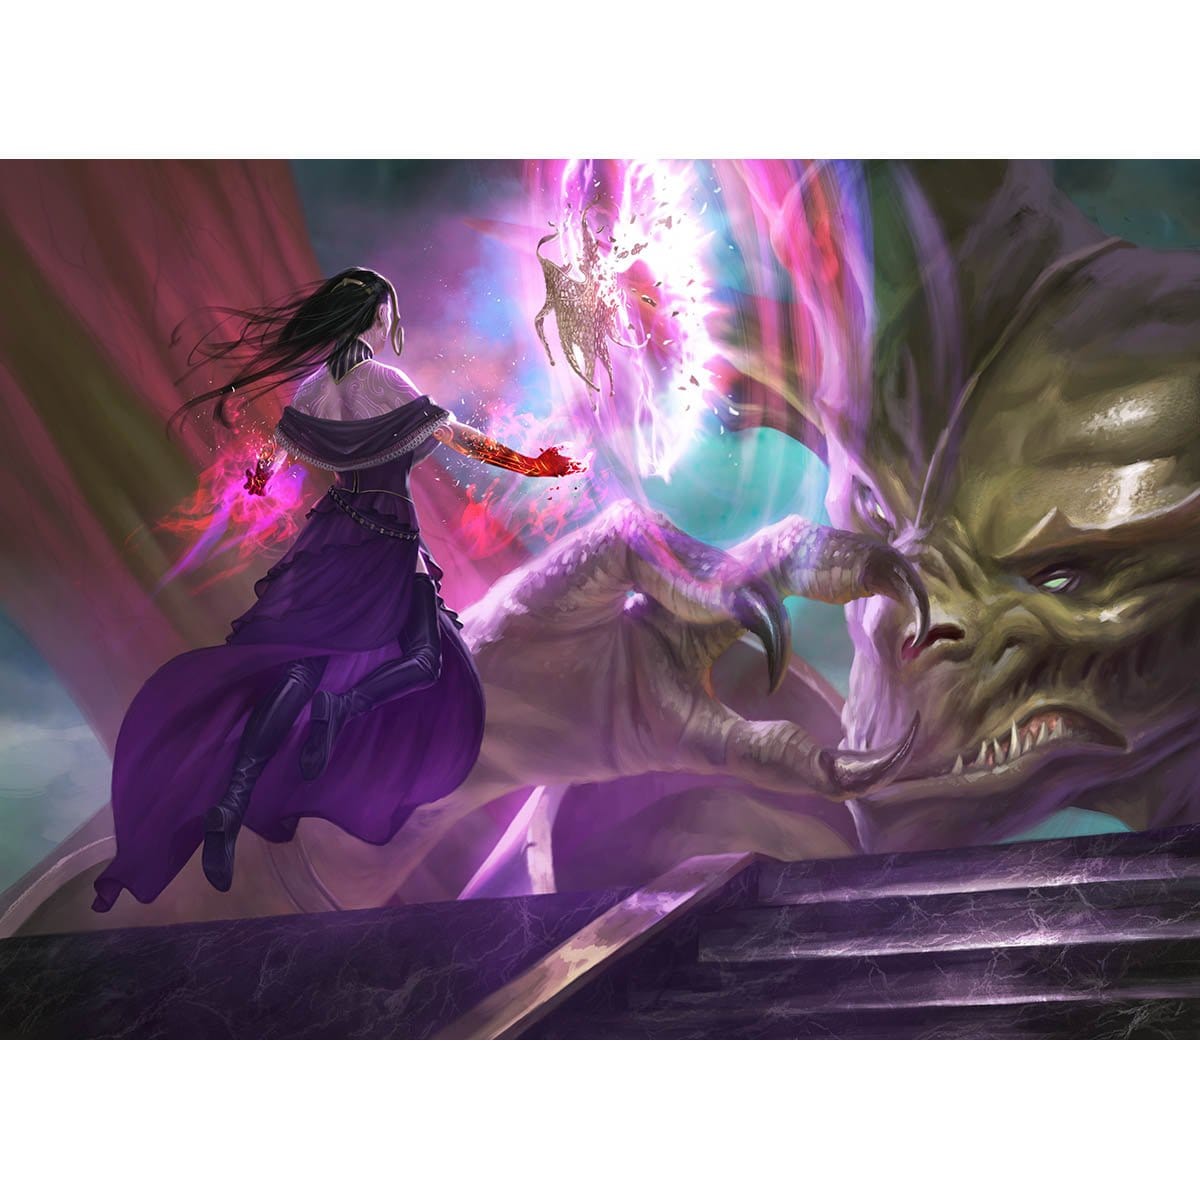 Finale of Eternity Print - Print - Original Magic Art - Accessories for Magic the Gathering and other card games